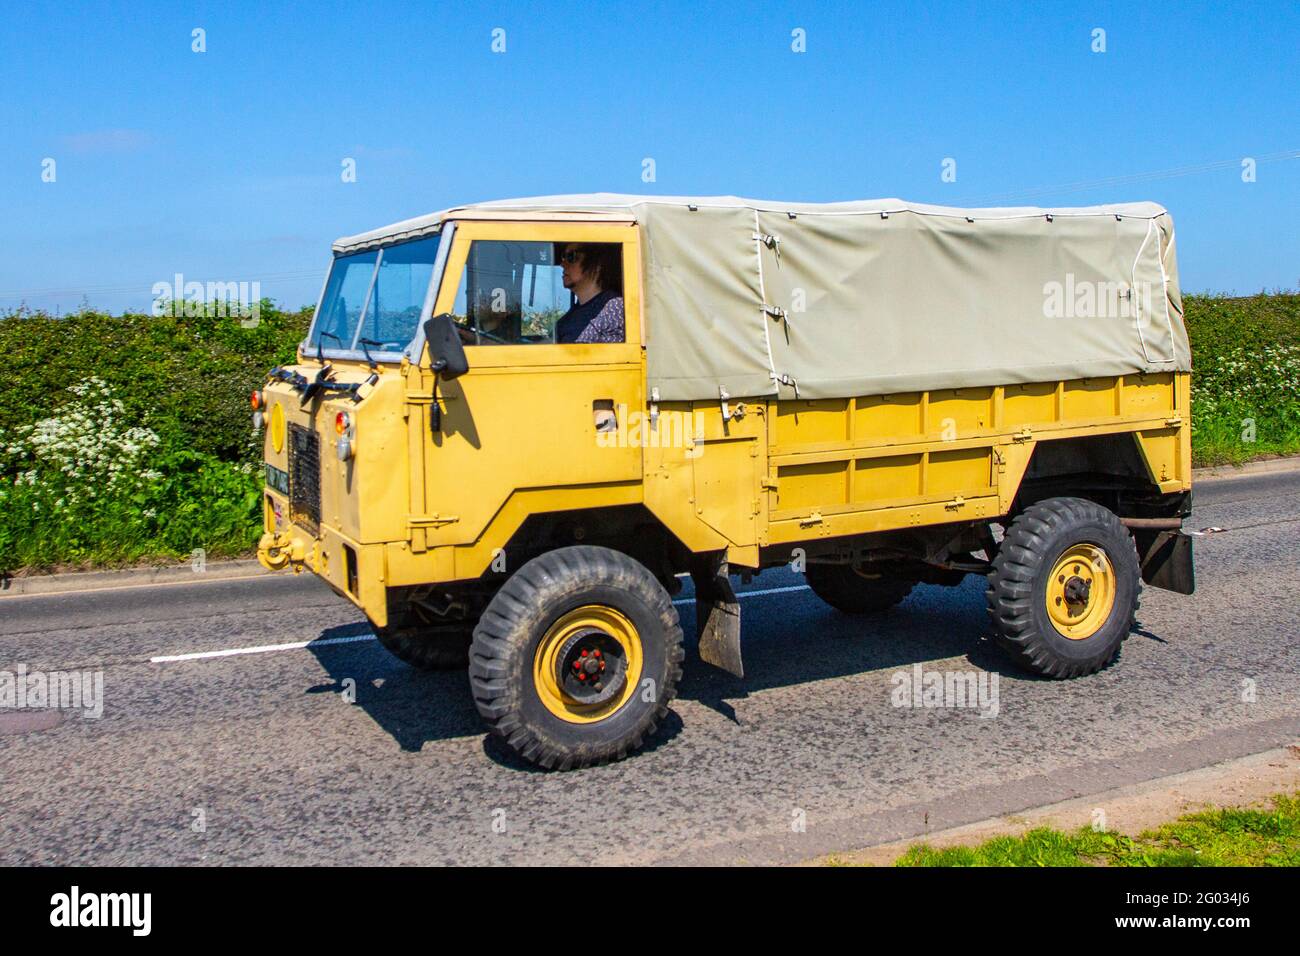 1977 70s seventies yellow British Army Land Rover 101 Truck canvas, heavy-duty four-wheel drive en-route to Capesthorne Hall classic May car show, Cheshire, UK Stock Photo